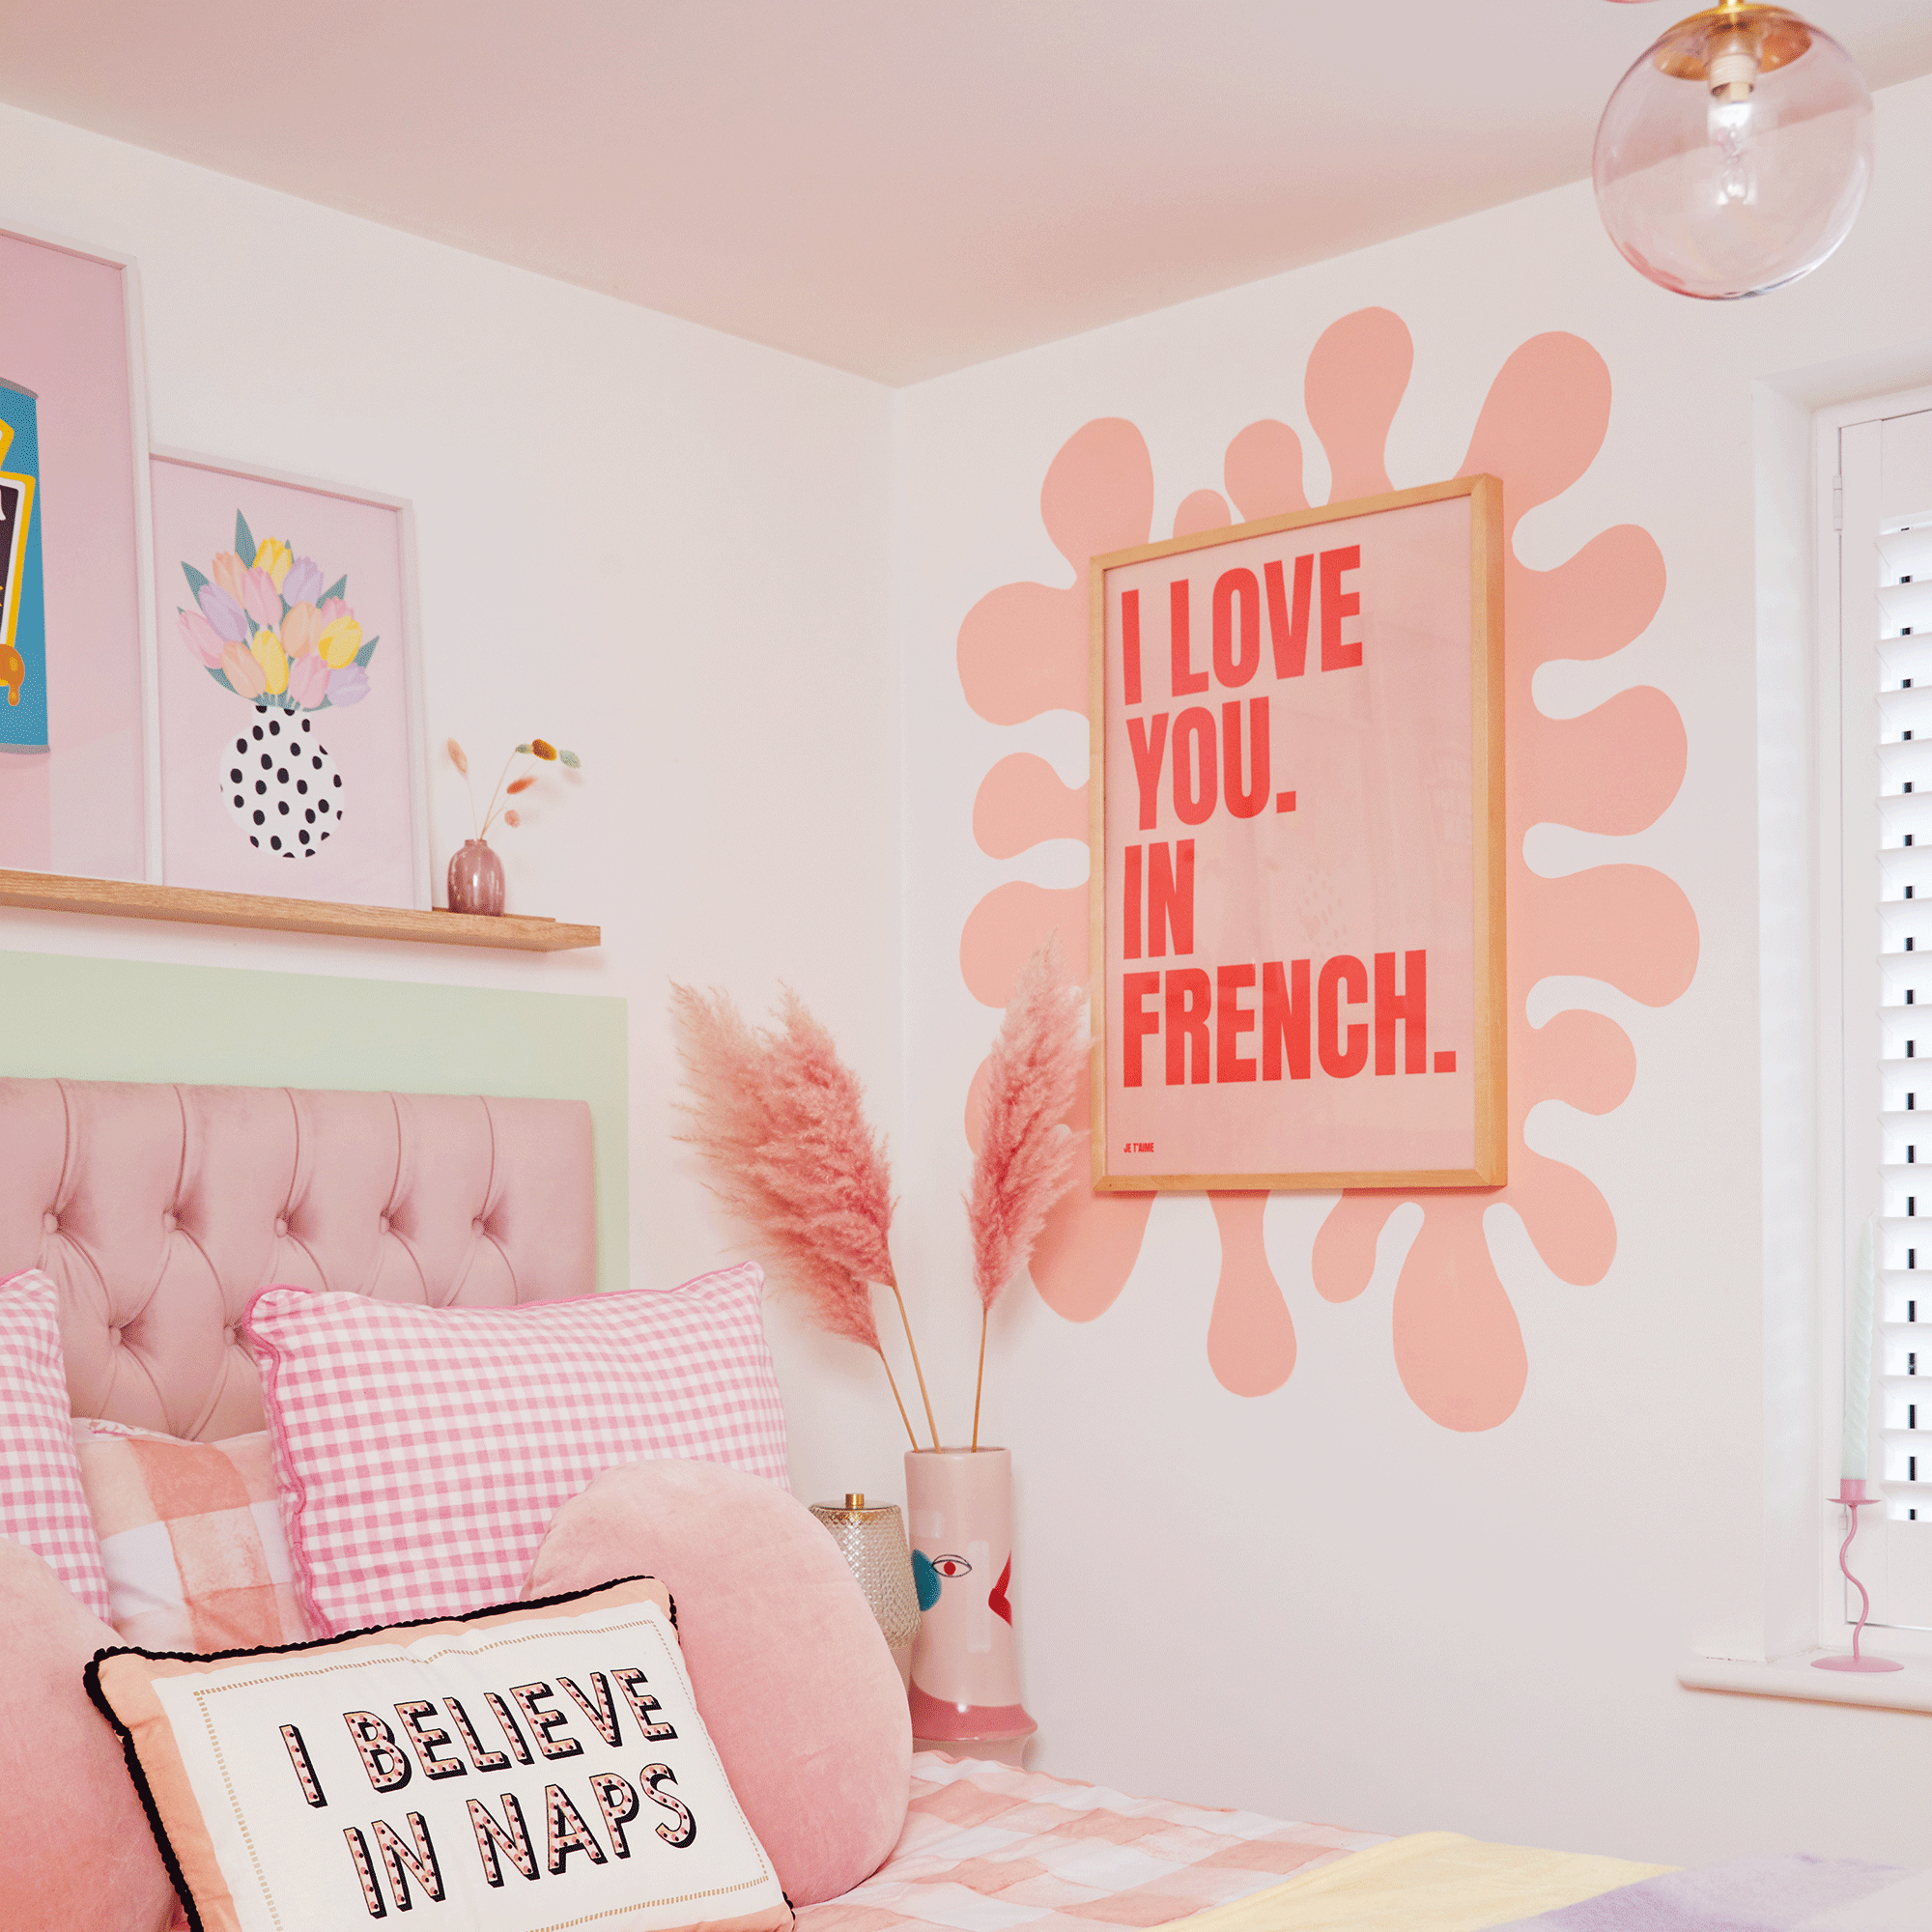 Pink bedroom with wall art surrounded by painted border